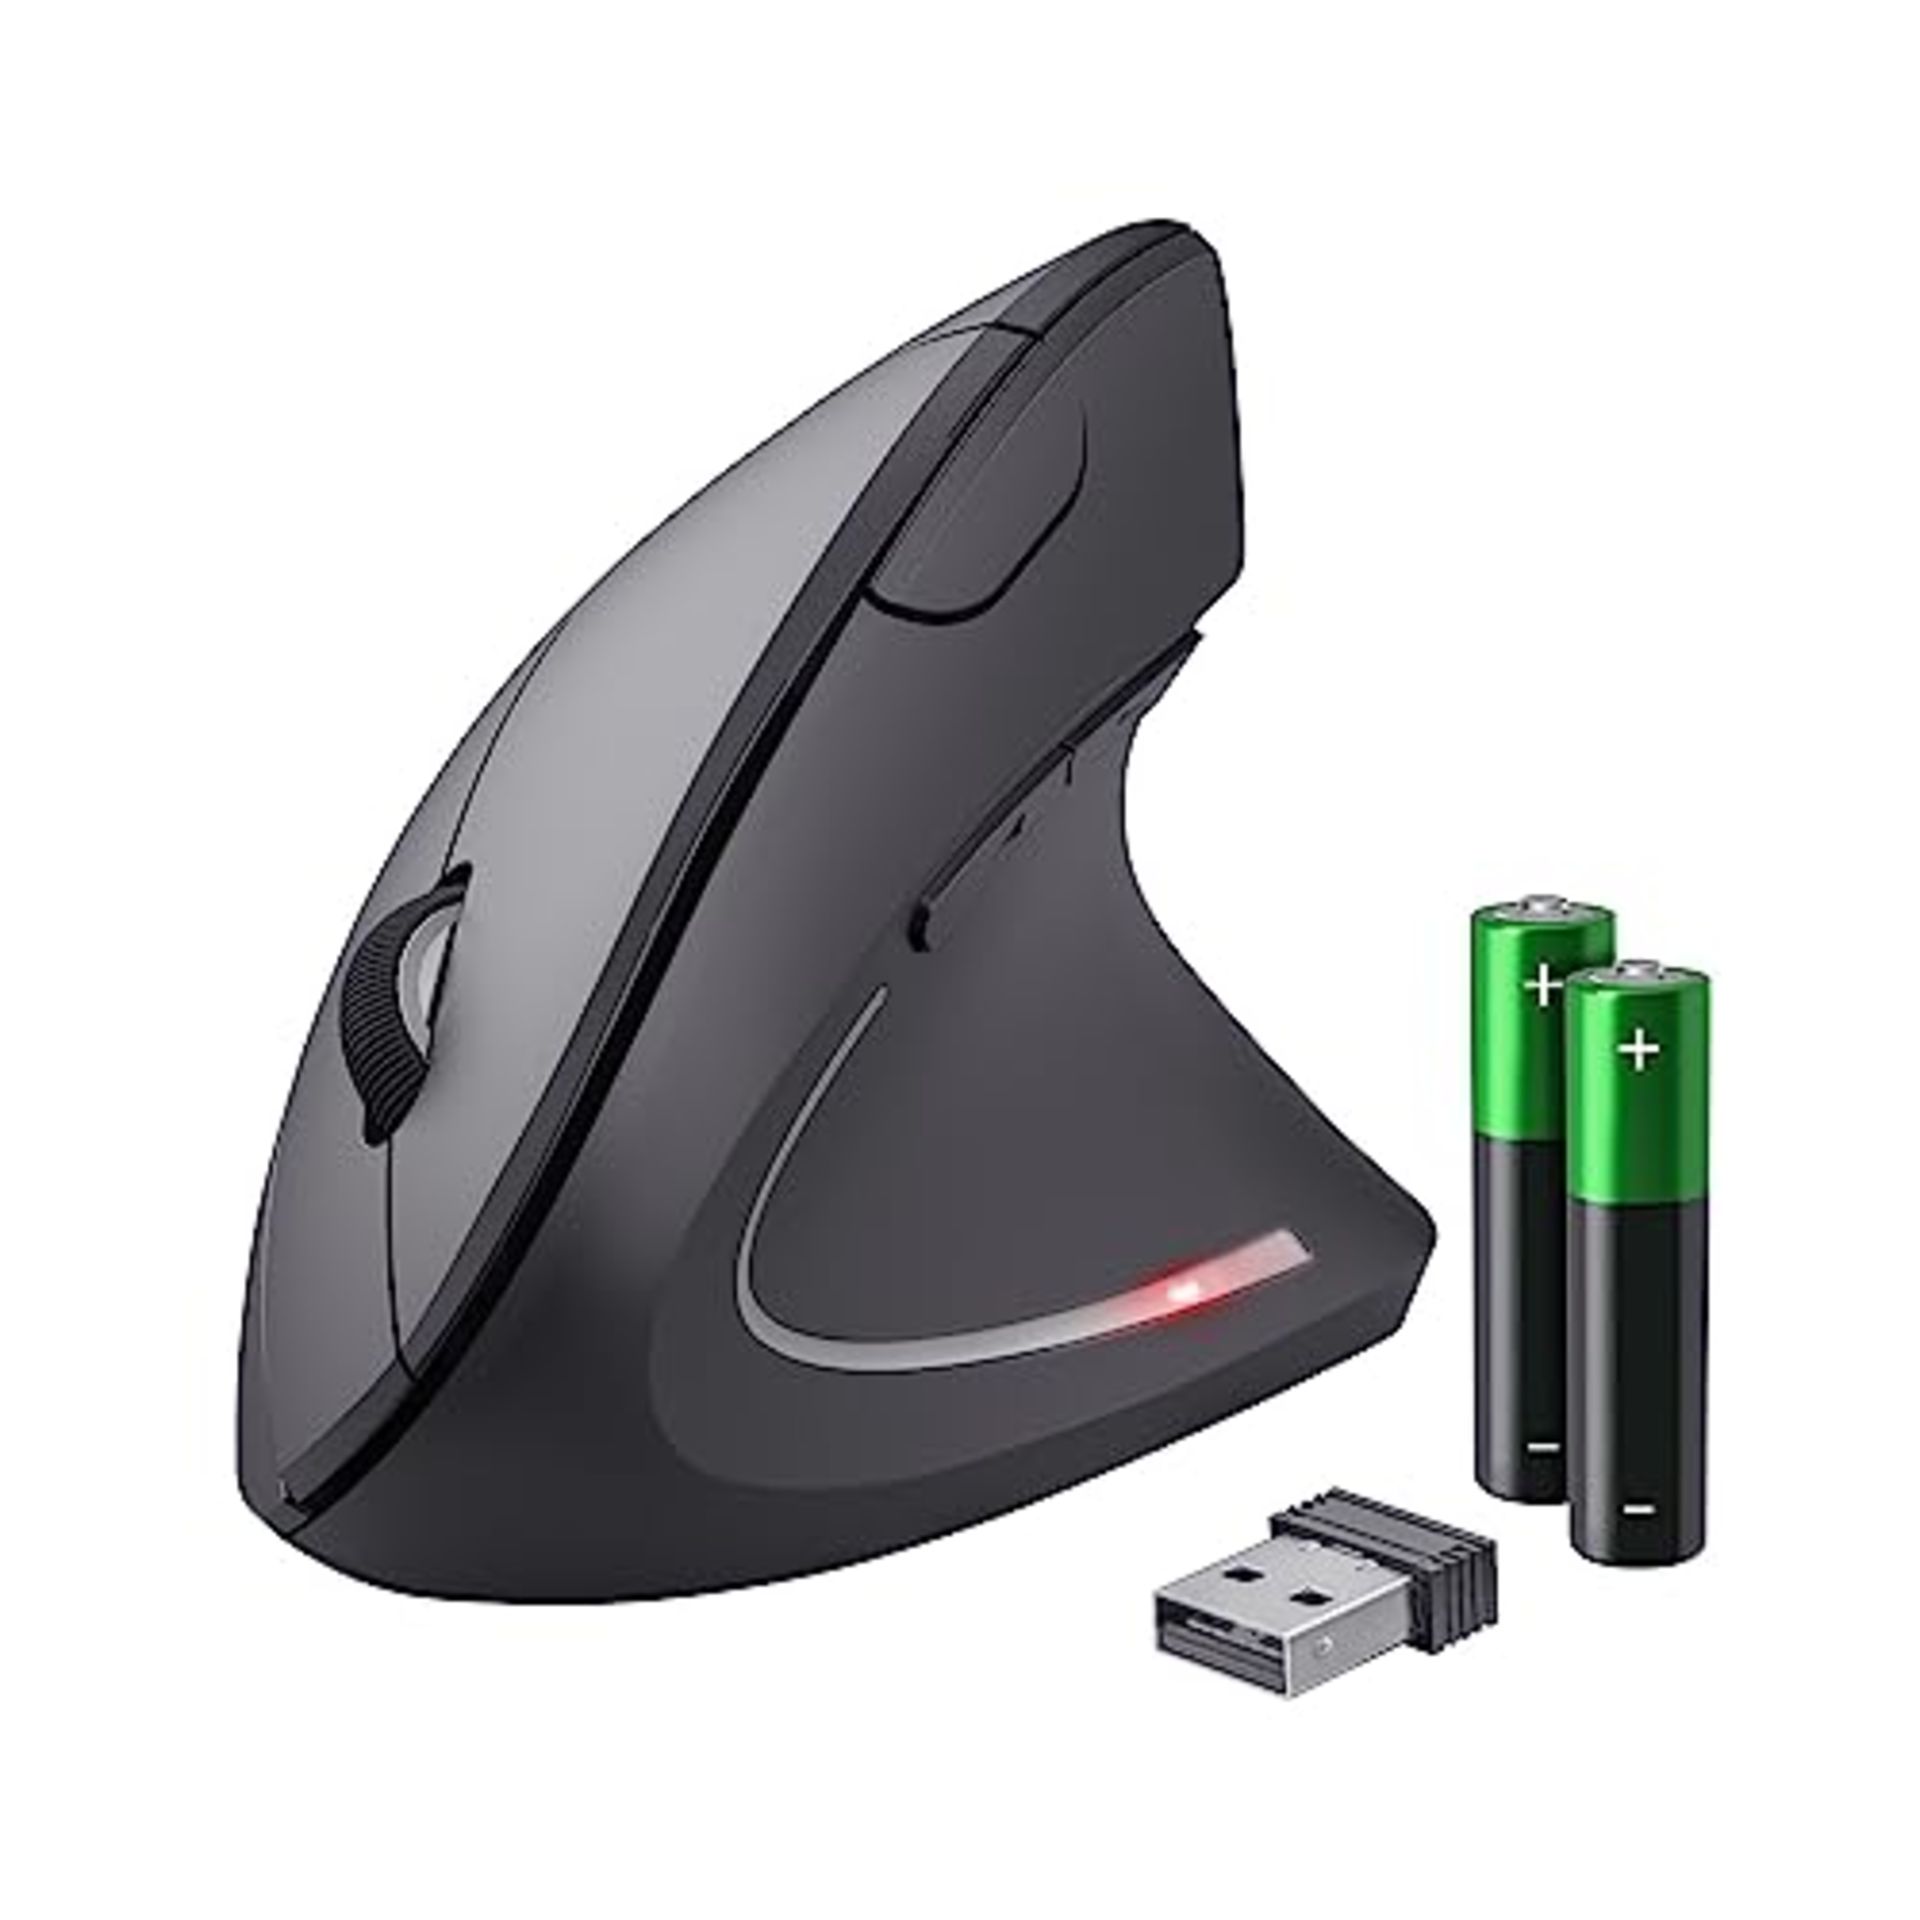 Trust Verto Wireless Vertical Mouse, Ergonomic Vertical Mouse, 800-1600 DPI, 6 Buttons - Image 4 of 6